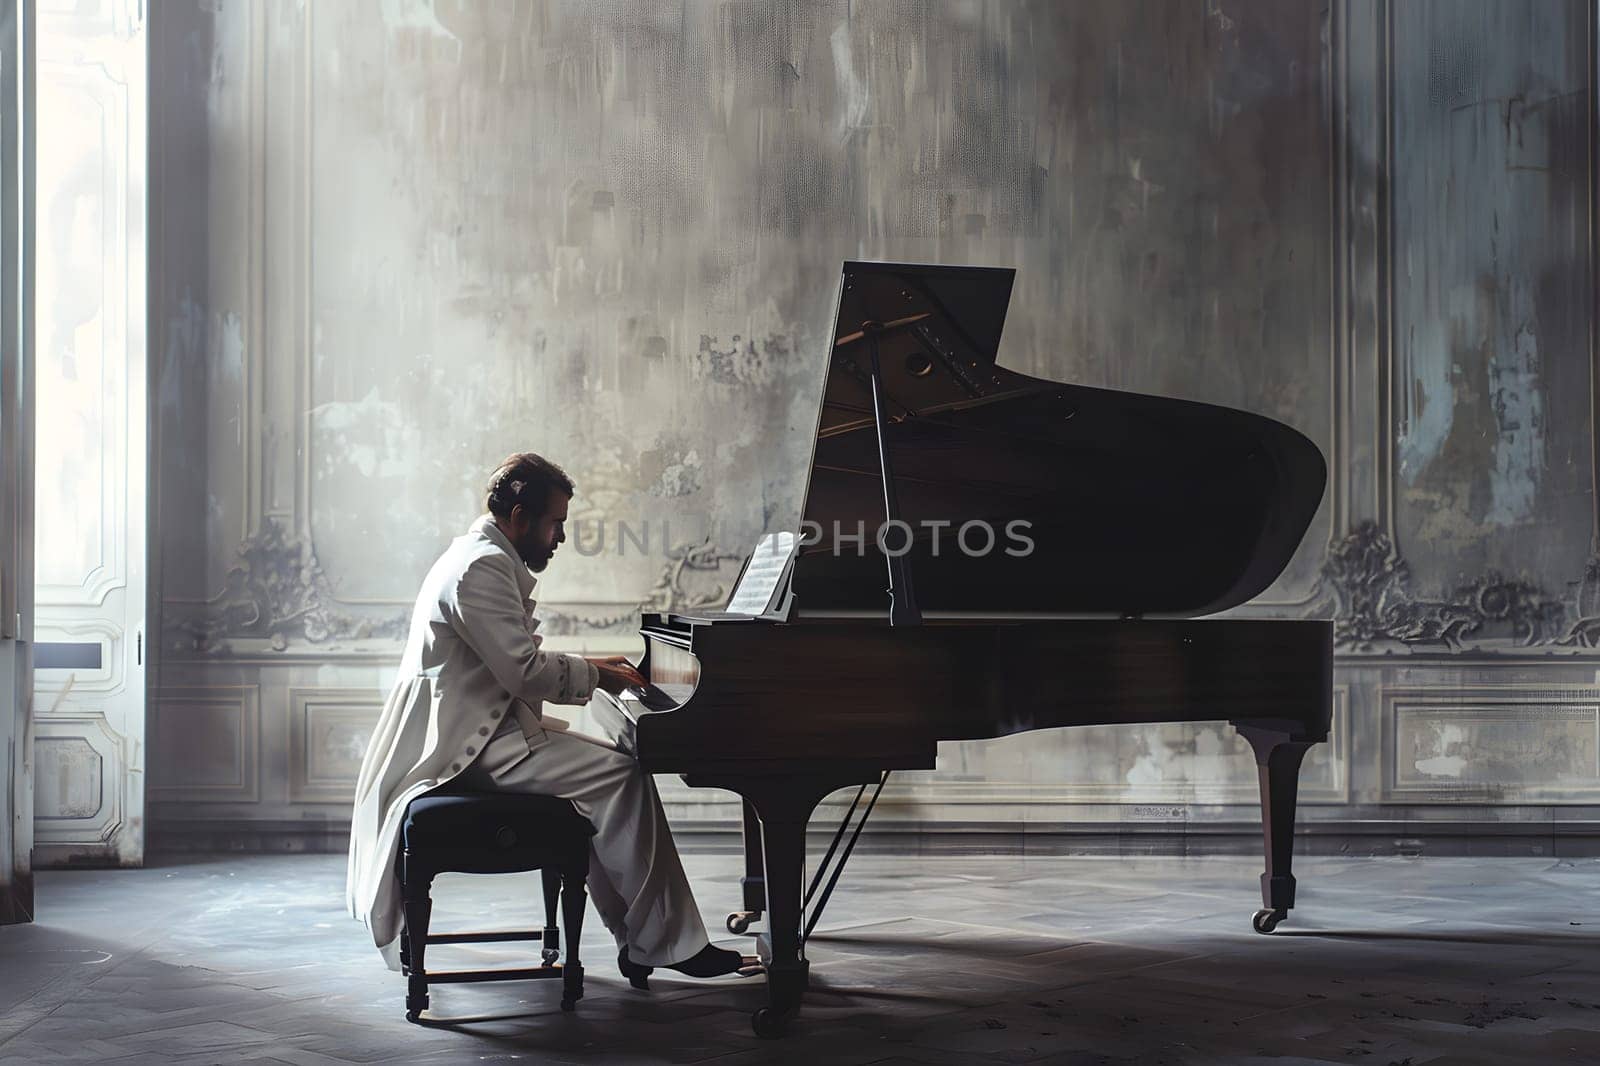 A pianist sits on a stool in a room, playing a grand piano. The music fills the air as he performs at a recital, showcasing his talent and passion for the art of music